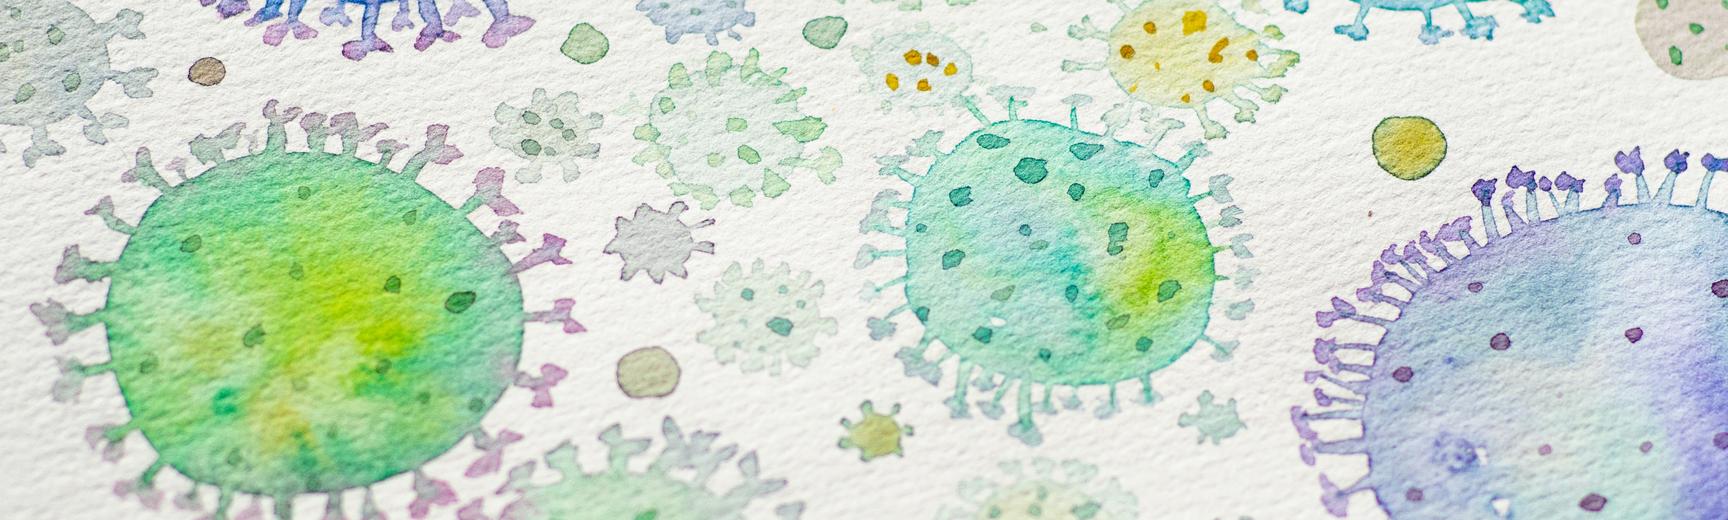 Watercolour painting on paper of lots of little microbes in pale shades of green, blue, and purple